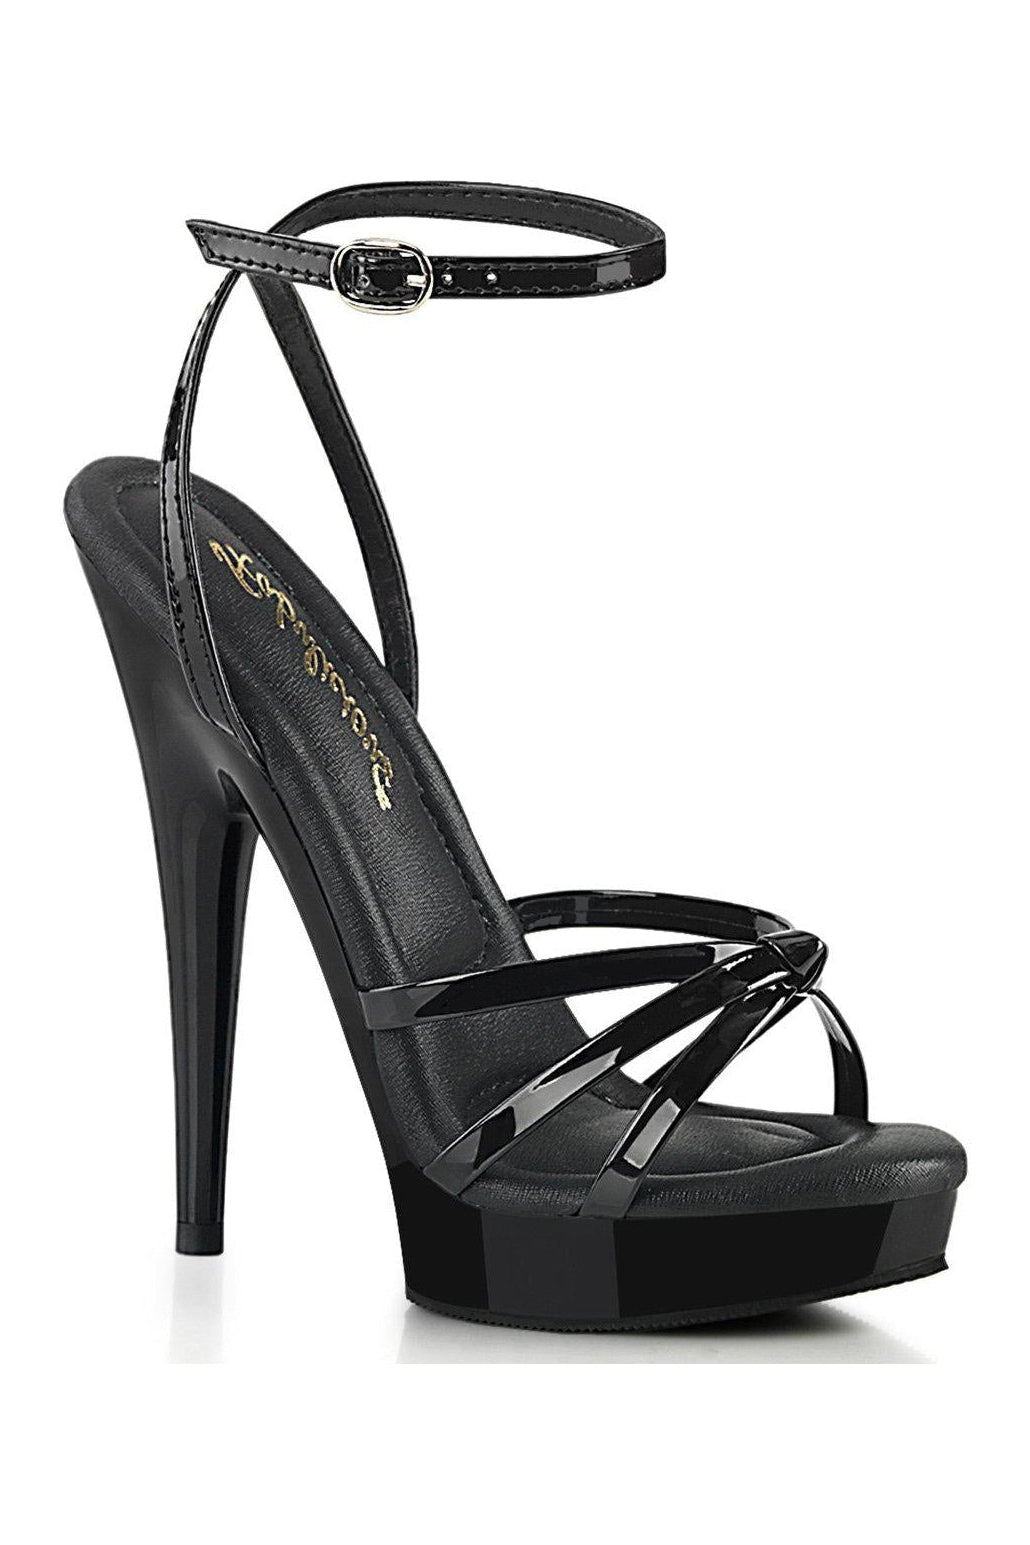 SULTRY-638 Sandal | Black Patent-Sandals-Fabulicious-Black-6-Patent-SEXYSHOES.COM